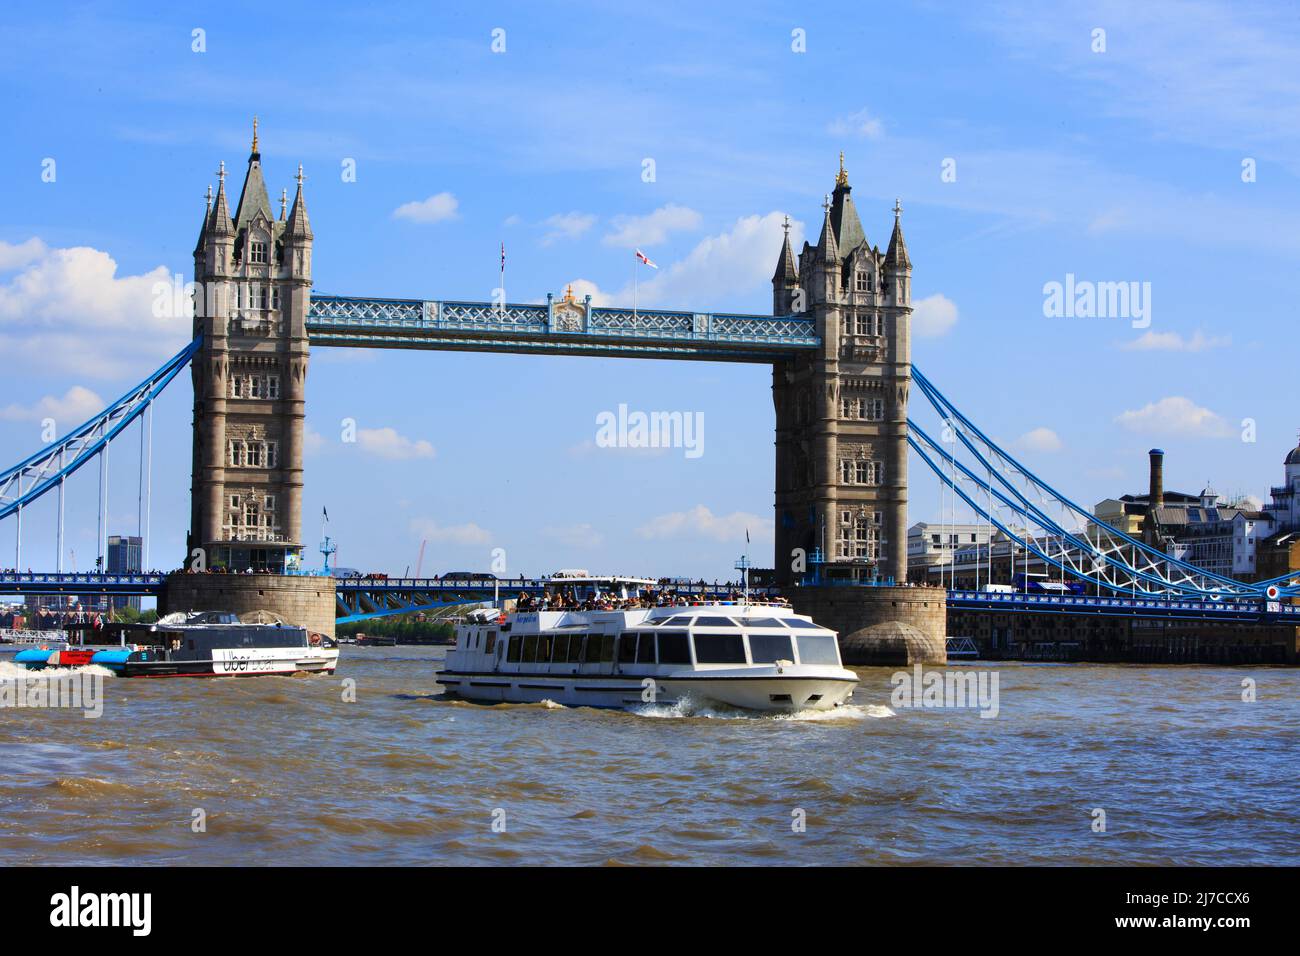 Tower Bridge, London, 2022.  Thames River Boat cruising the Thames, this is a popular and enjoyable way of enjoying the sights of London.  London is r Stock Photo